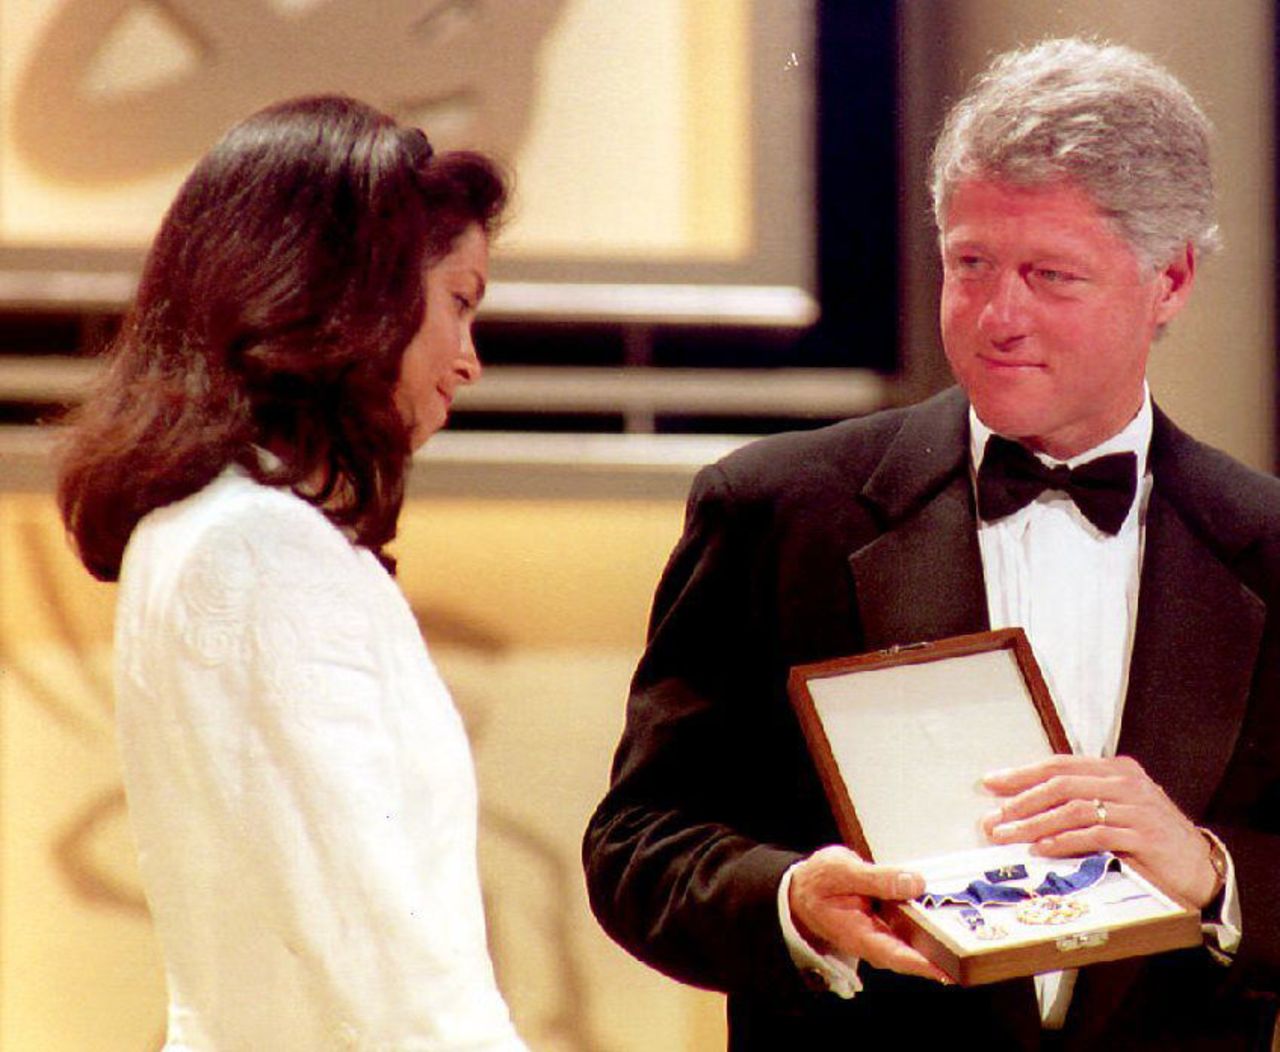 Ashe's widow Jeanne receives the Presidential Medal of Freedom from Bill Clinton on behalf of her late husband in June 1993. 